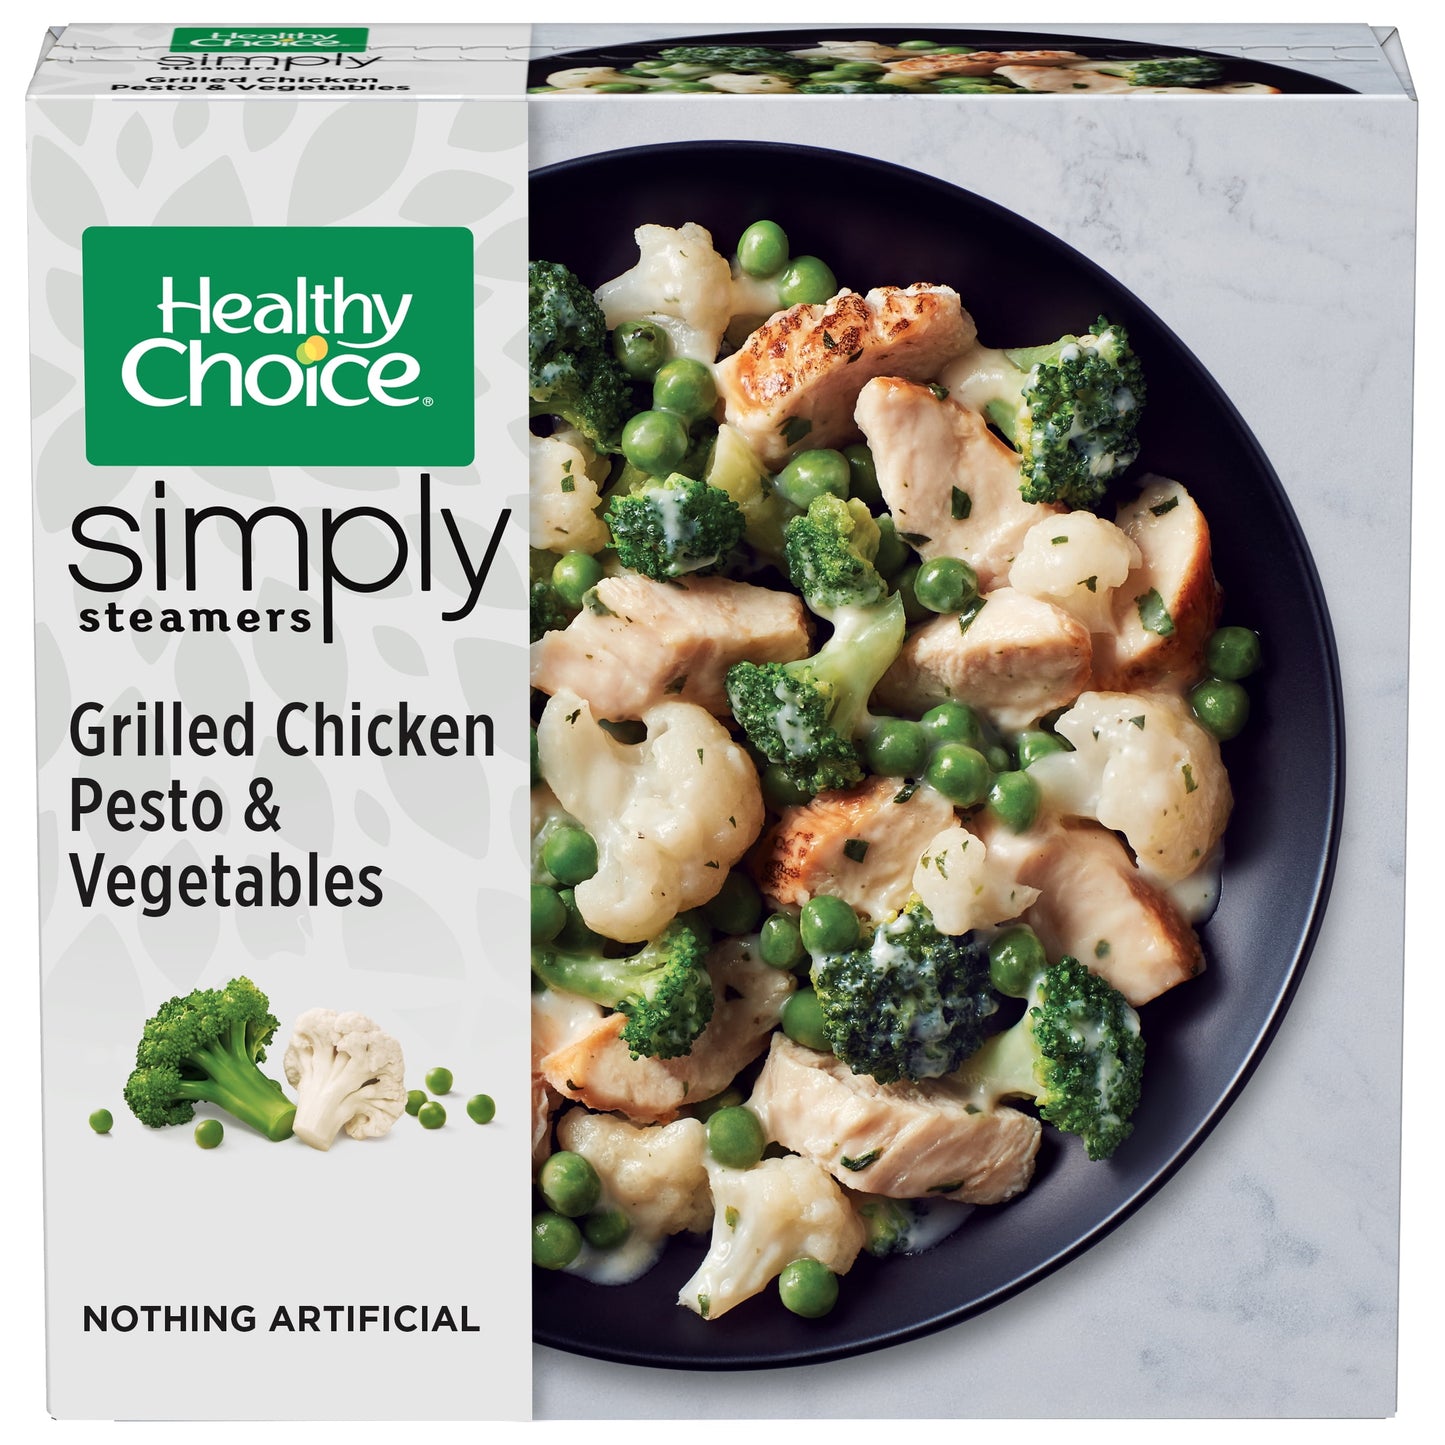 Healthy Choice Simply Steamers Grilled Chicken Pesto & Vegetables Frozen Meal, 9.15 oz (Frozen)